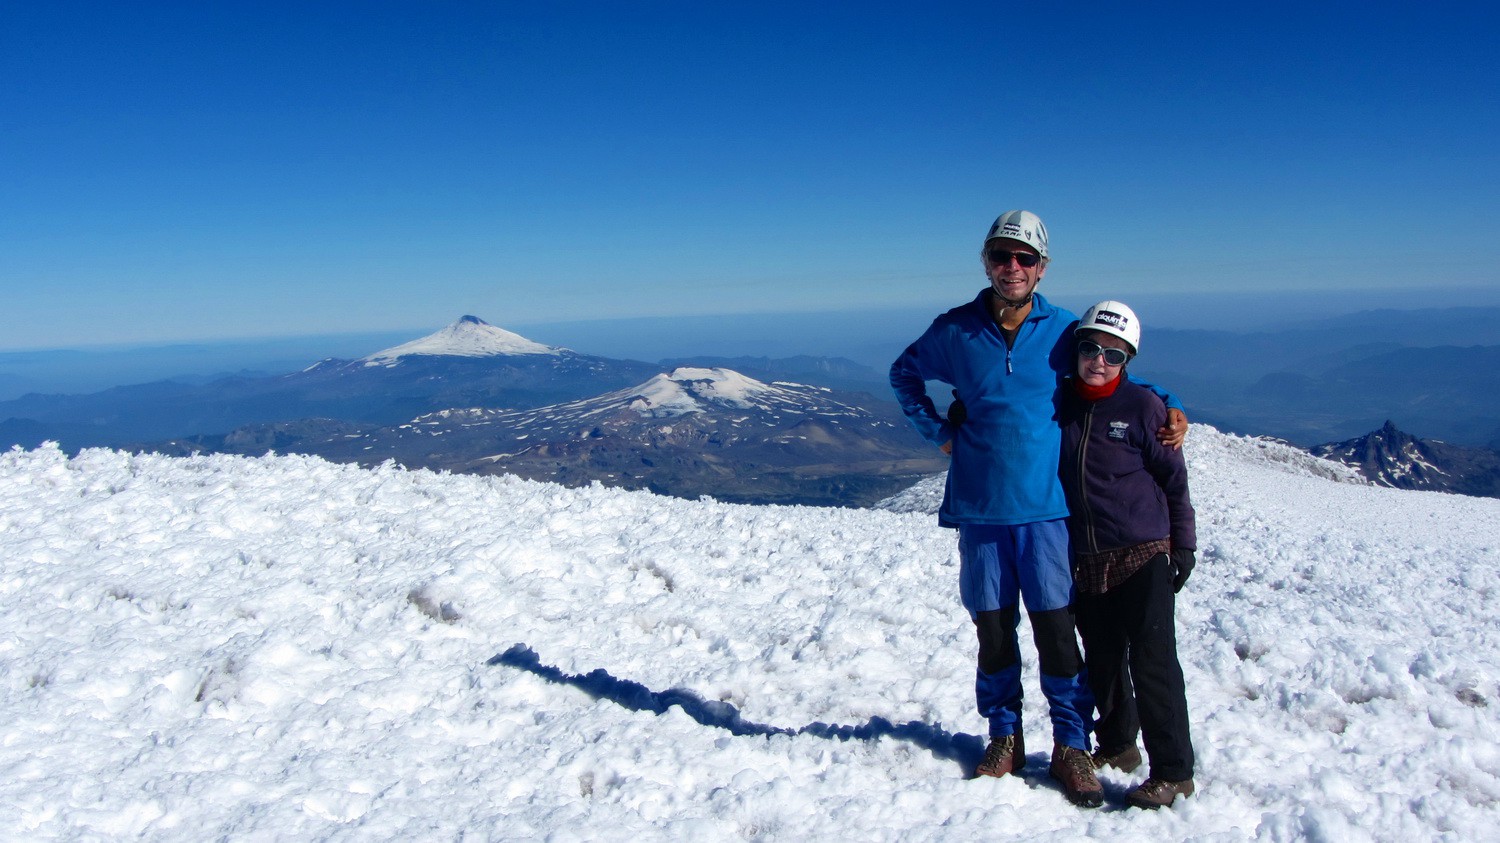 Alfred and Marion on the top of Volcan Lanin, 3776 meters sea level